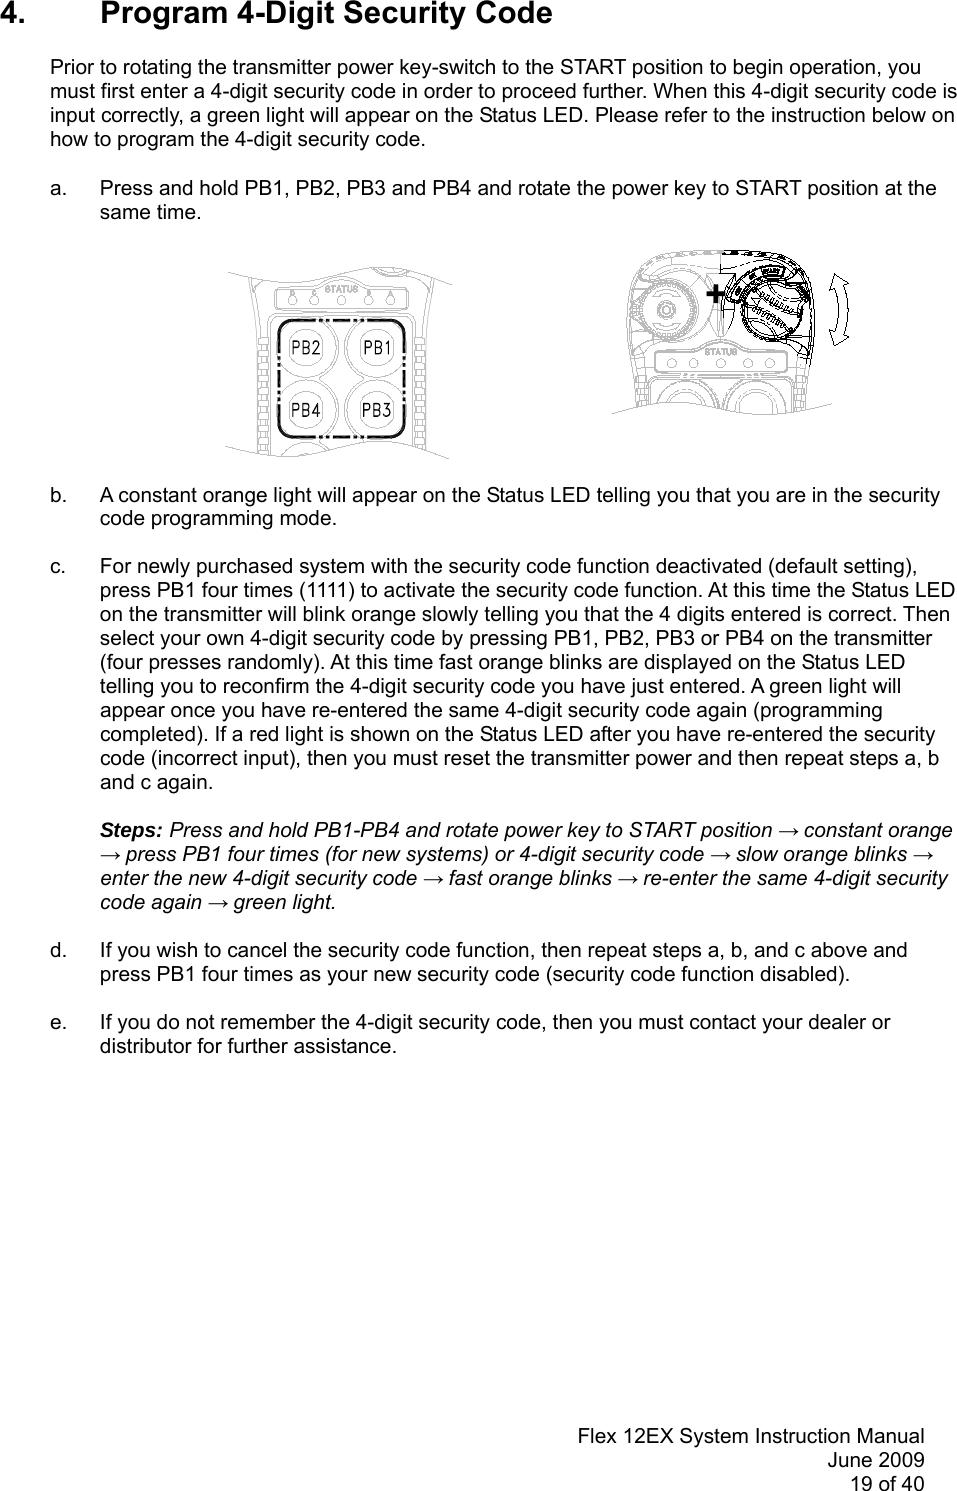 Flex 12EX System Instruction ManualJune 200919 of 404. Program 4-Digit Security CodePrior to rotating the transmitter power key-switch to the START position to begin operation, youmust first enter a 4-digit security code in order to proceed further. When this 4-digit security code isinput correctly, a green light will appear on the Status LED. Please refer to the instruction below onhow to program the 4-digit security code.a. Press and hold PB1, PB2, PB3 and PB4 and rotate the power key to START position at thesame time. +b. A constant orange light will appear on the Status LED telling you that you are in the securitycode programming mode.c. For newly purchased system with the security code function deactivated (default setting),press PB1 four times (1111) to activate the security code function. At this time the Status LEDon the transmitter will blink orange slowly telling you that the 4 digits entered is correct. Thenselect your own 4-digit security code by pressing PB1, PB2, PB3 or PB4 on the transmitter(four presses randomly). At this time fast orange blinks are displayed on the Status LEDtelling you to reconfirm the 4-digit security code you have just entered. A green light willappear once you have re-entered the same 4-digit security code again (programmingcompleted). If a red light is shown on the Status LED after you have re-entered the securitycode (incorrect input), then you must reset the transmitter power and then repeat steps a, band c again.Steps: Press and hold PB1-PB4 and rotate power key to START position → constant orange→ press PB1 four times (for new systems) or 4-digit security code → slow orange blinks →enter the new 4-digit security code → fast orange blinks → re-enter the same 4-digit securitycode again → green light.d. If you wish to cancel the security code function, then repeat steps a, b, and c above andpress PB1 four times as your new security code (security code function disabled).e. If you do not remember the 4-digit security code, then you must contact your dealer ordistributor for further assistance.